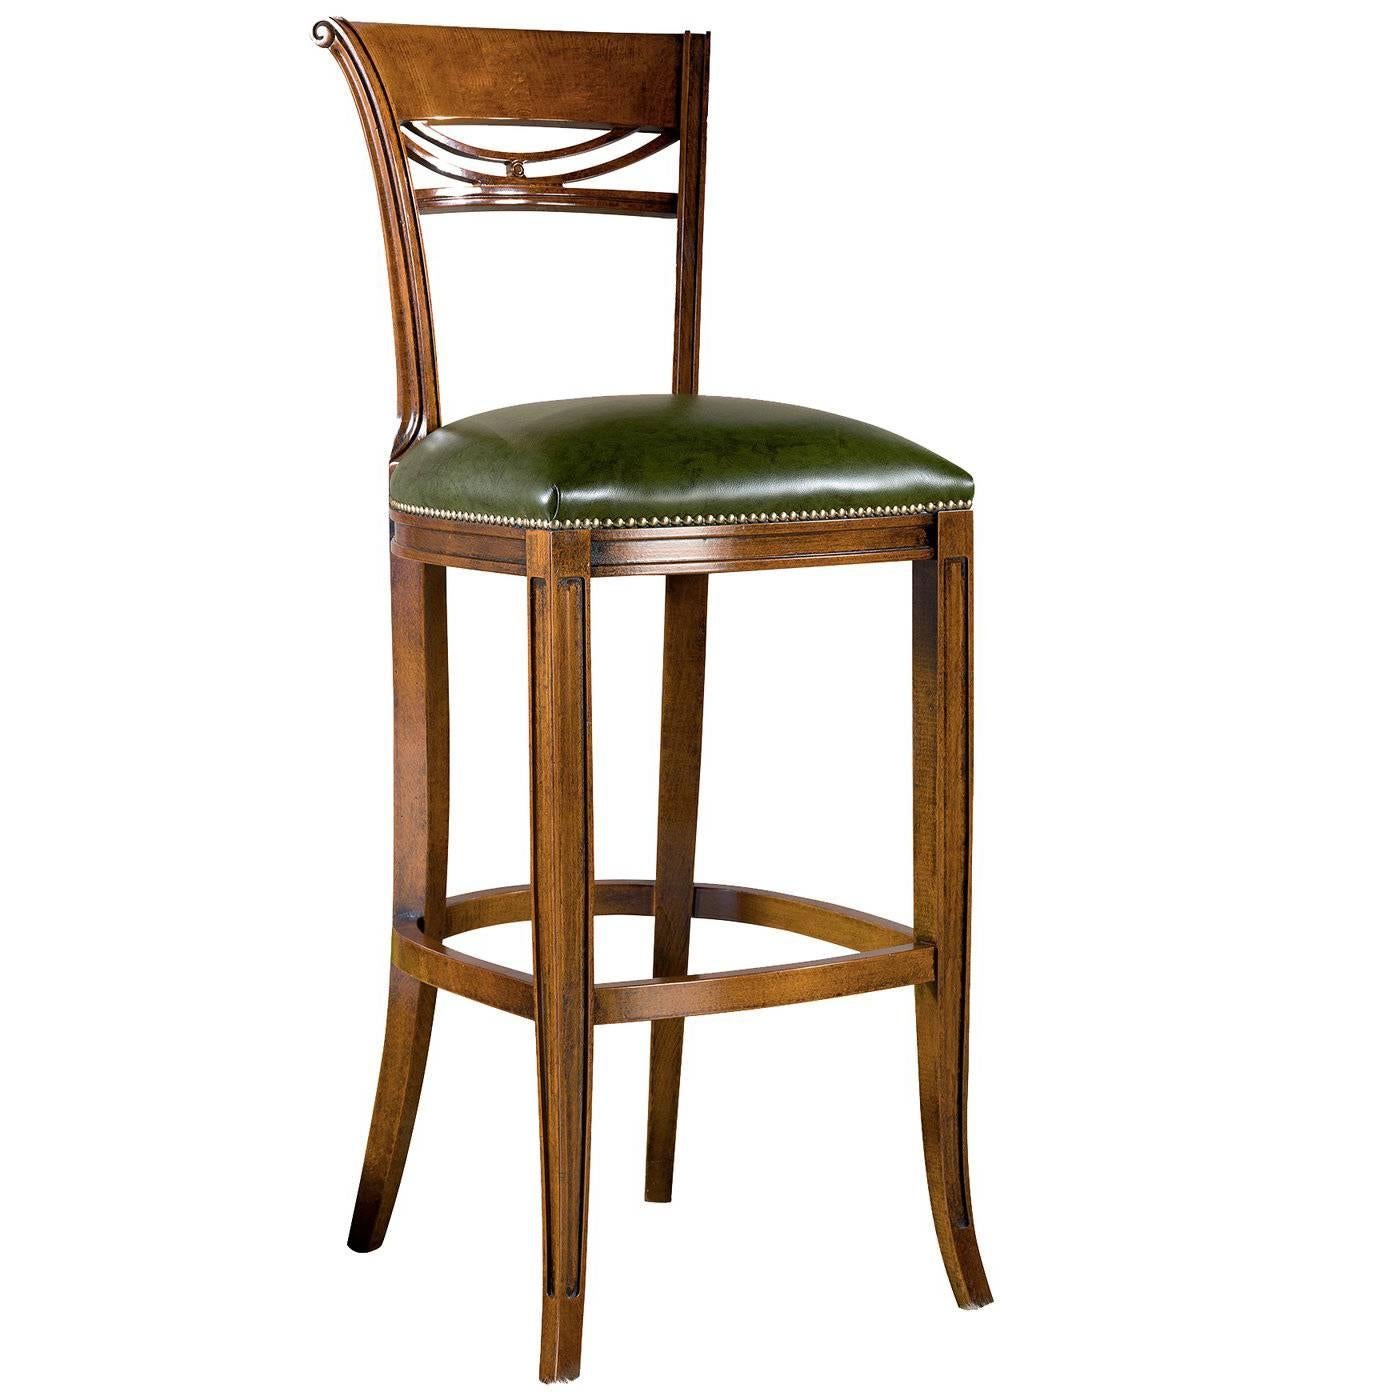 Green Leather Stool with Backrest